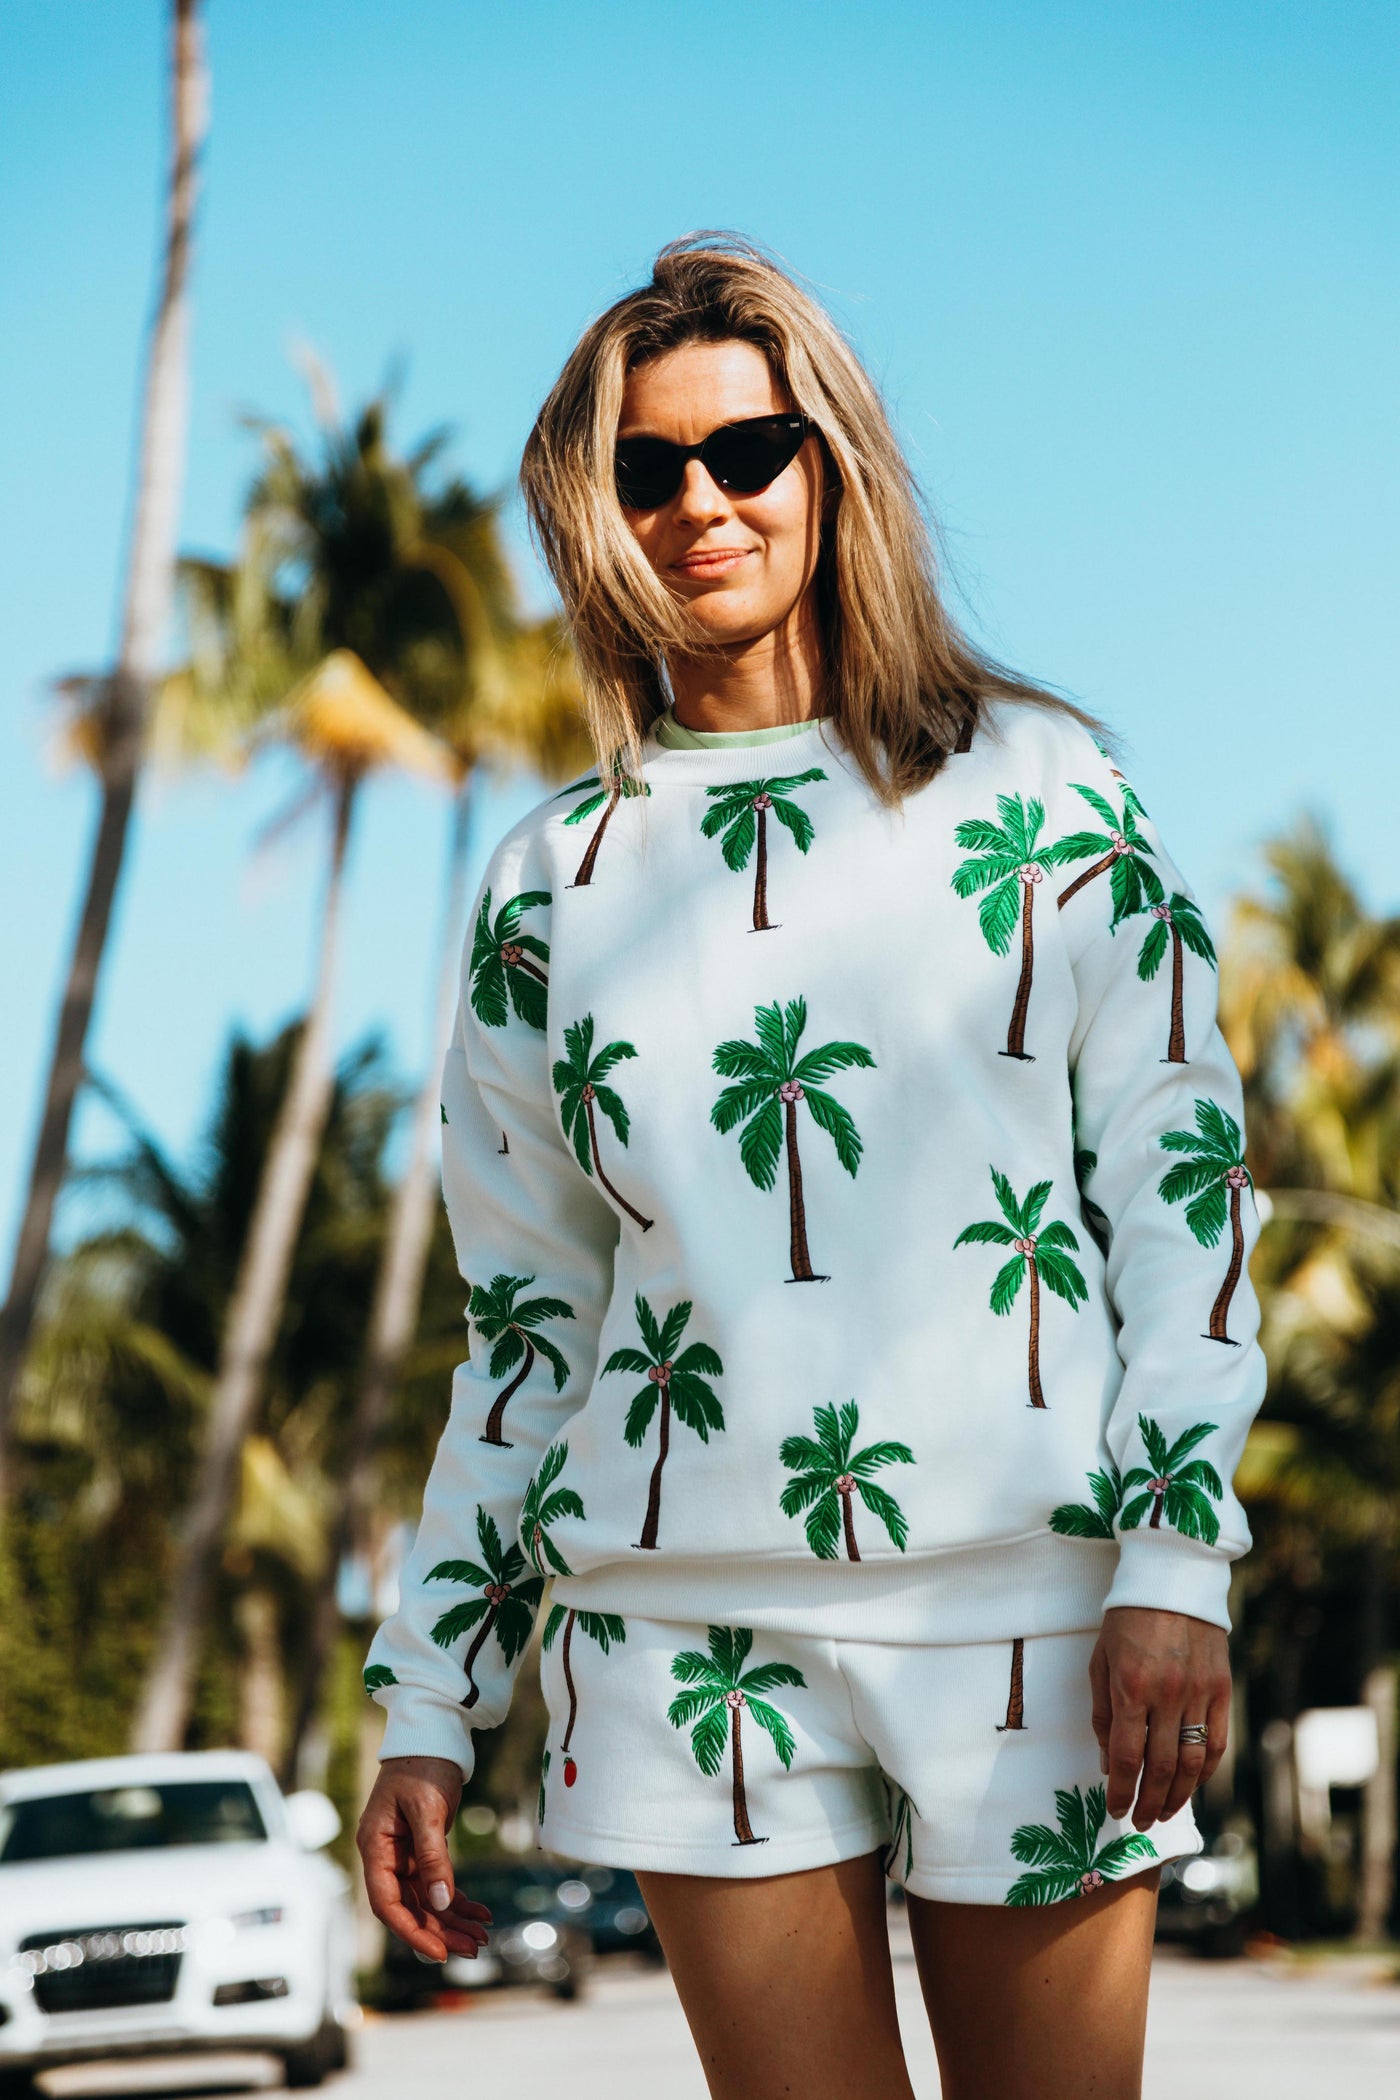 Embroidered Palm Sweat |Ivory| Women